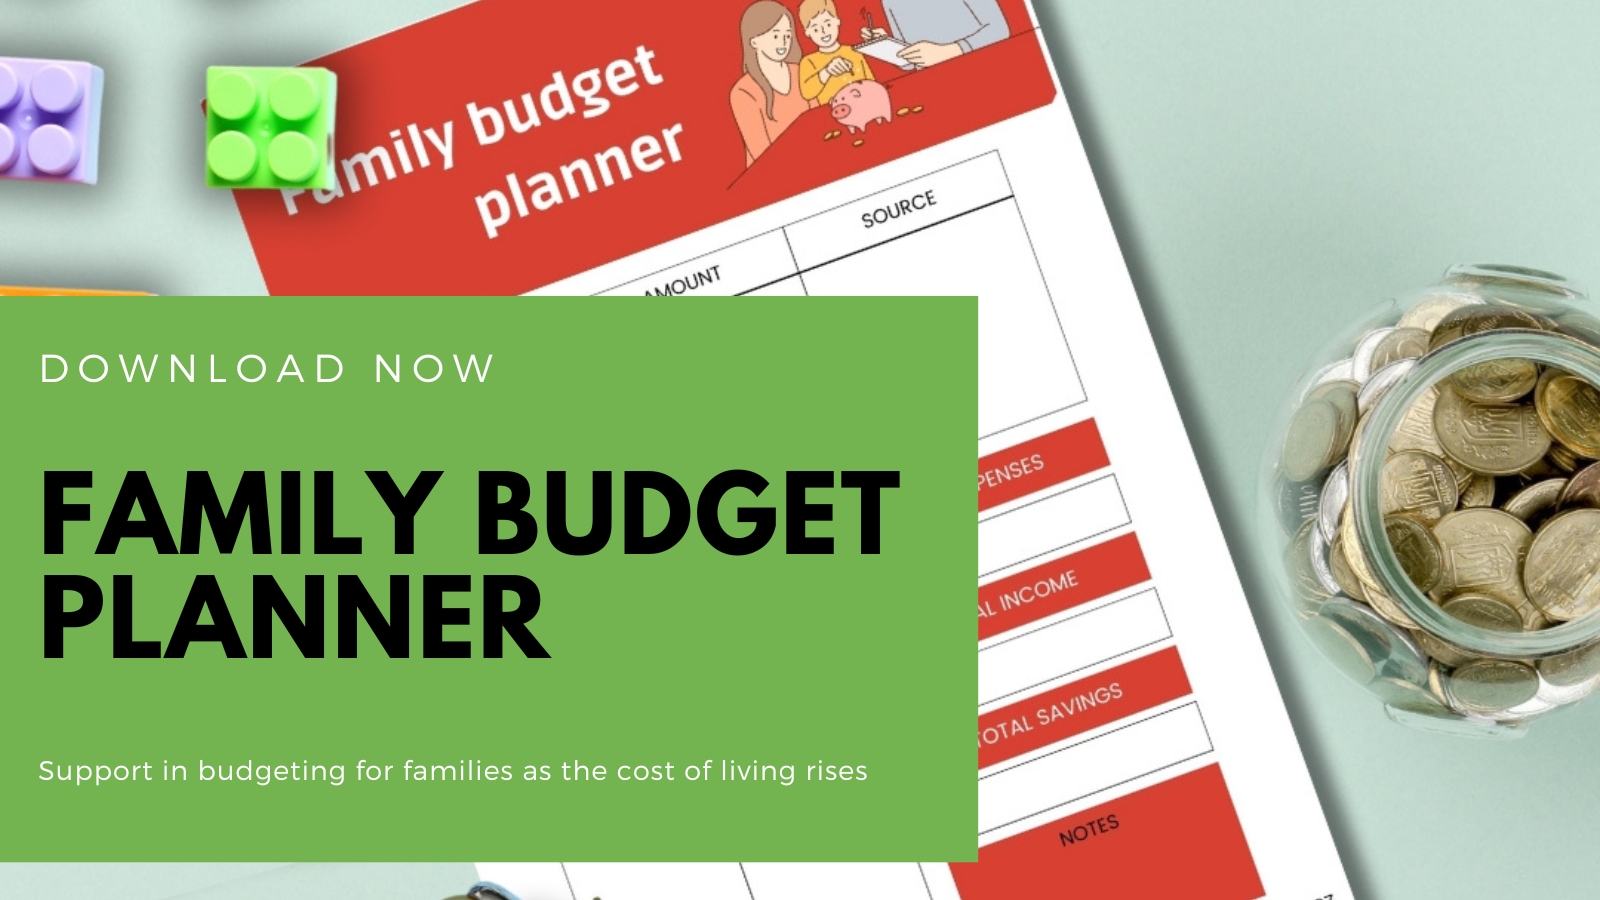 Family budget planner printable to help with the cost of living